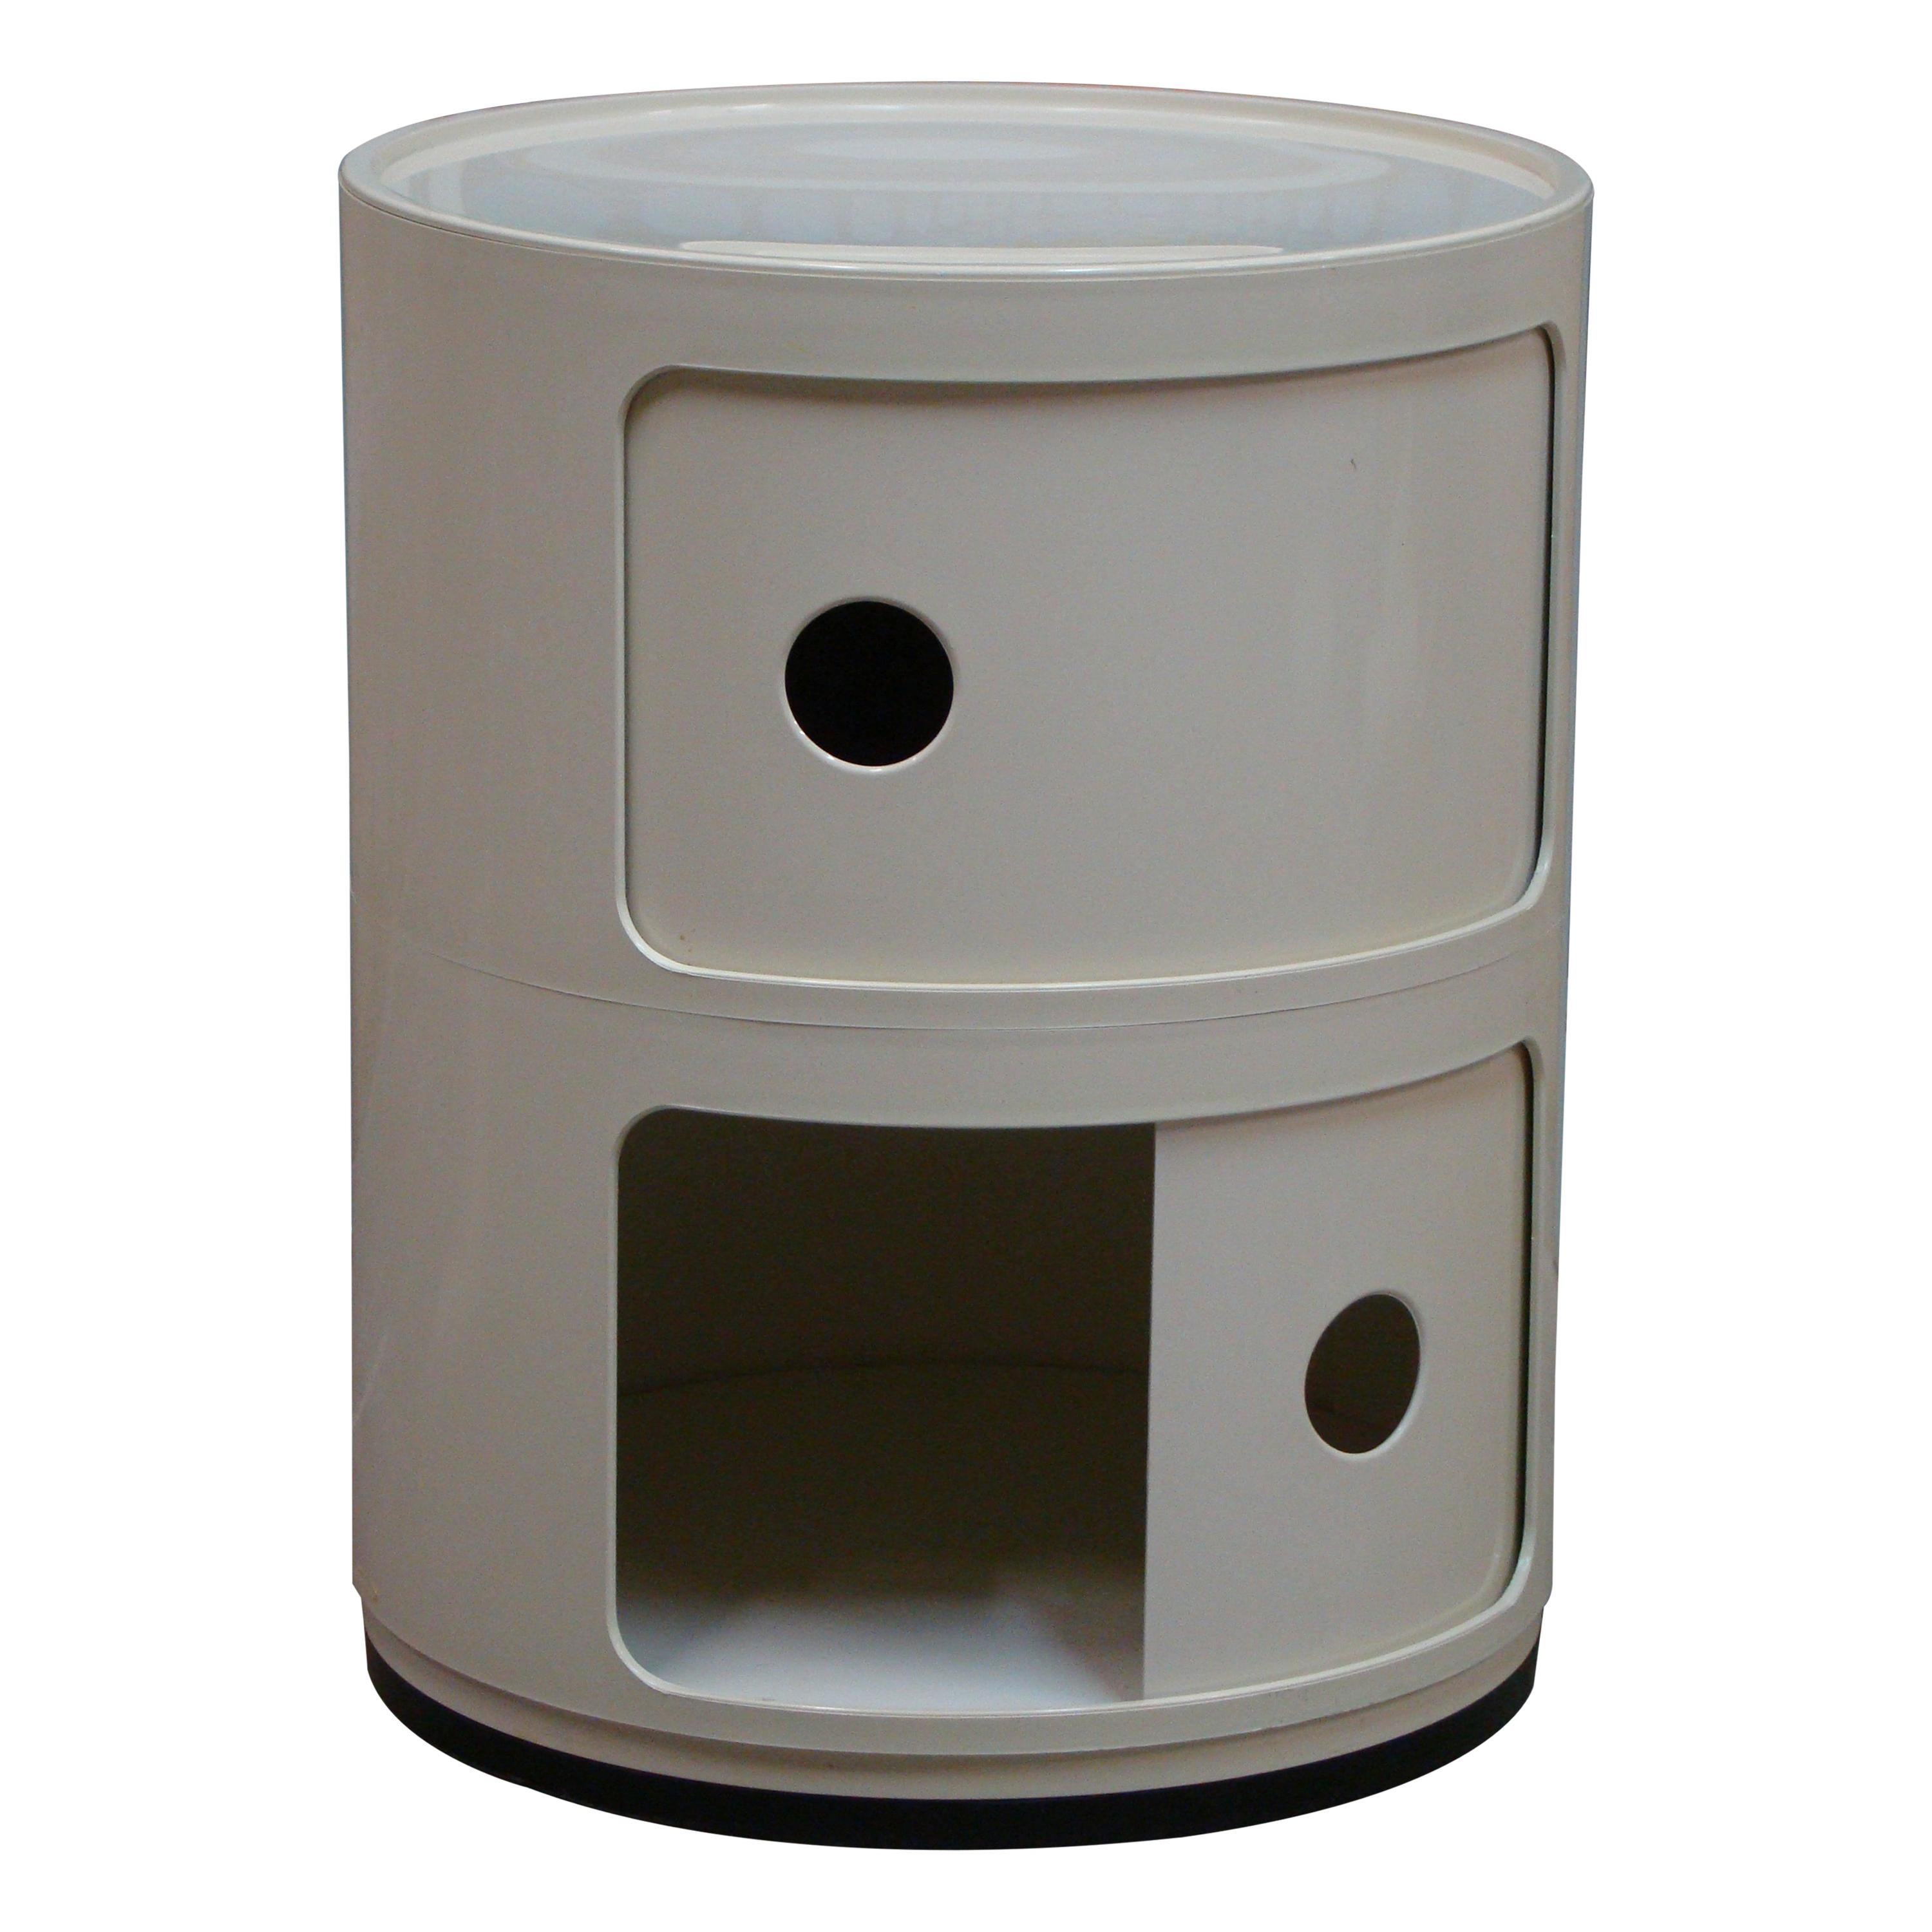 Kartell "Componibili" Round 2-Section Stacking Storage Unit in White, Italy